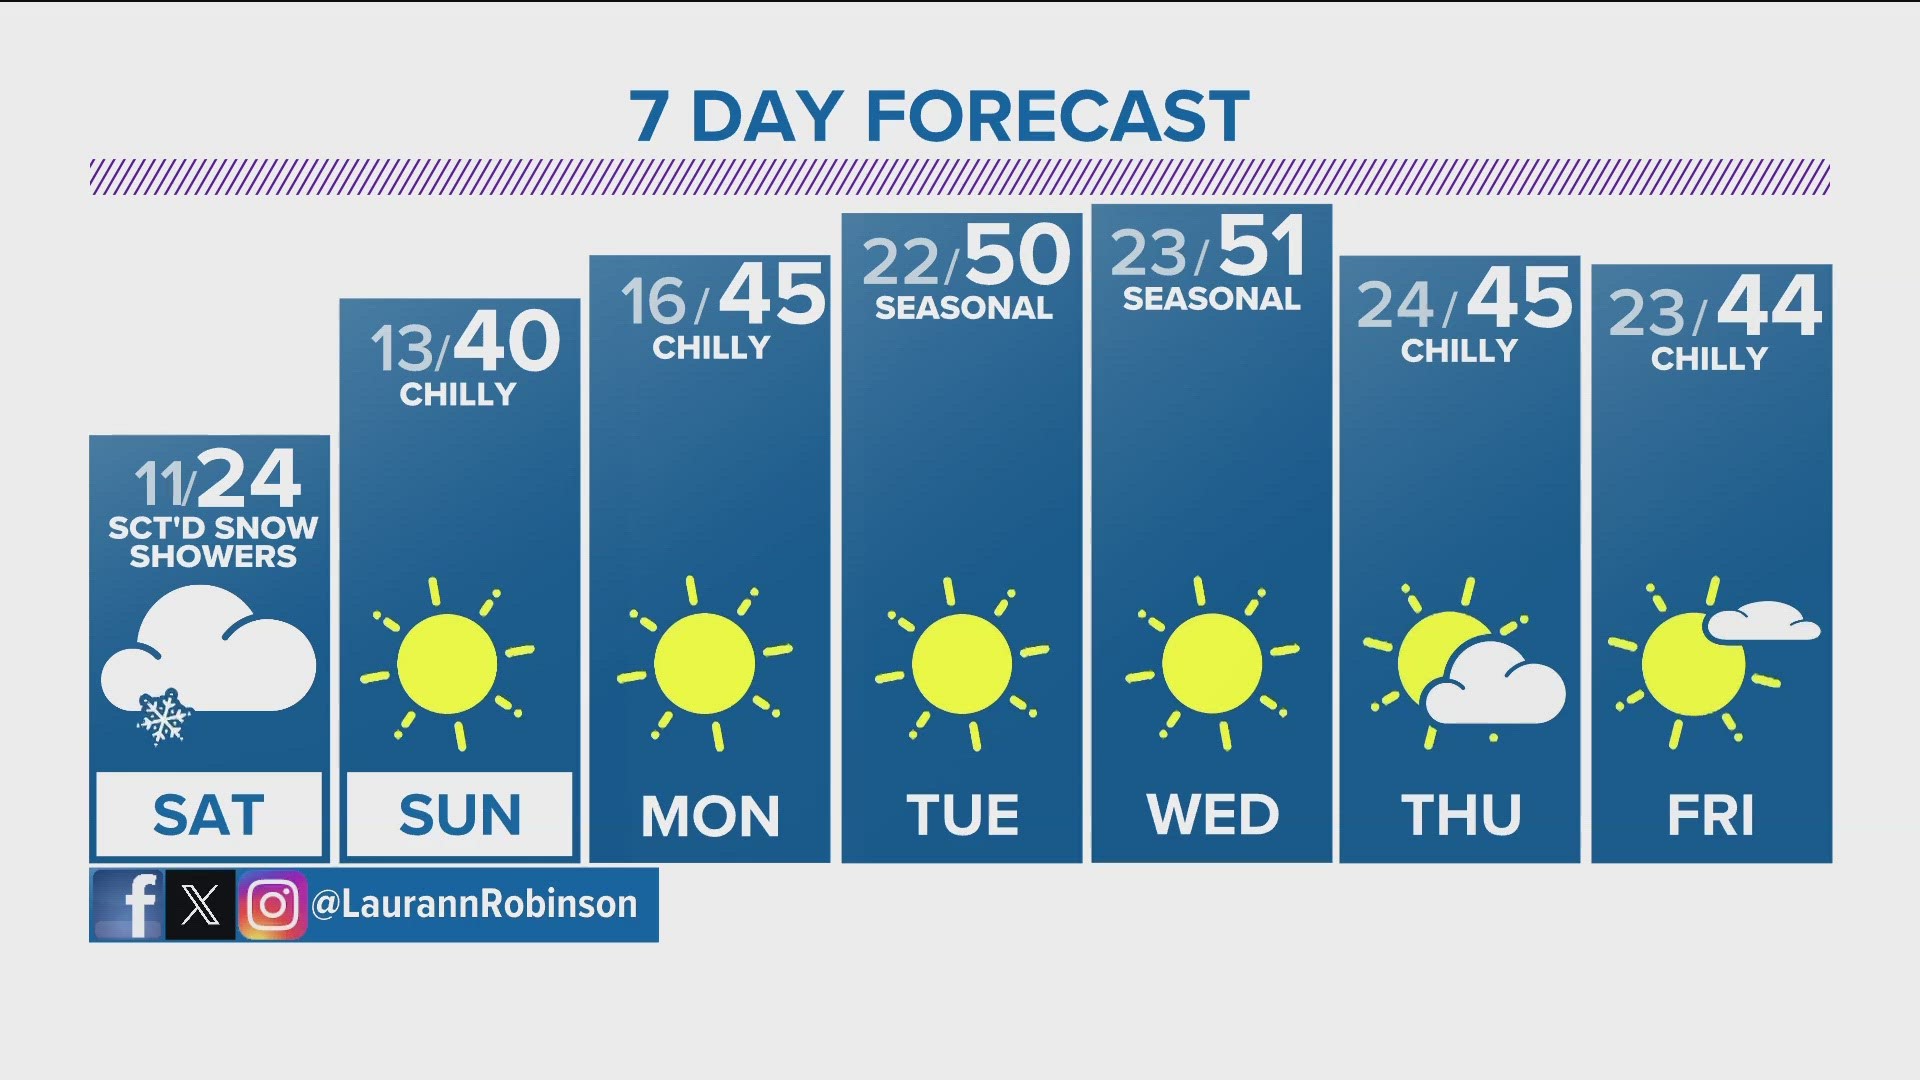 Expect more light snow and cold temperatures before a warm-up arrives next week.